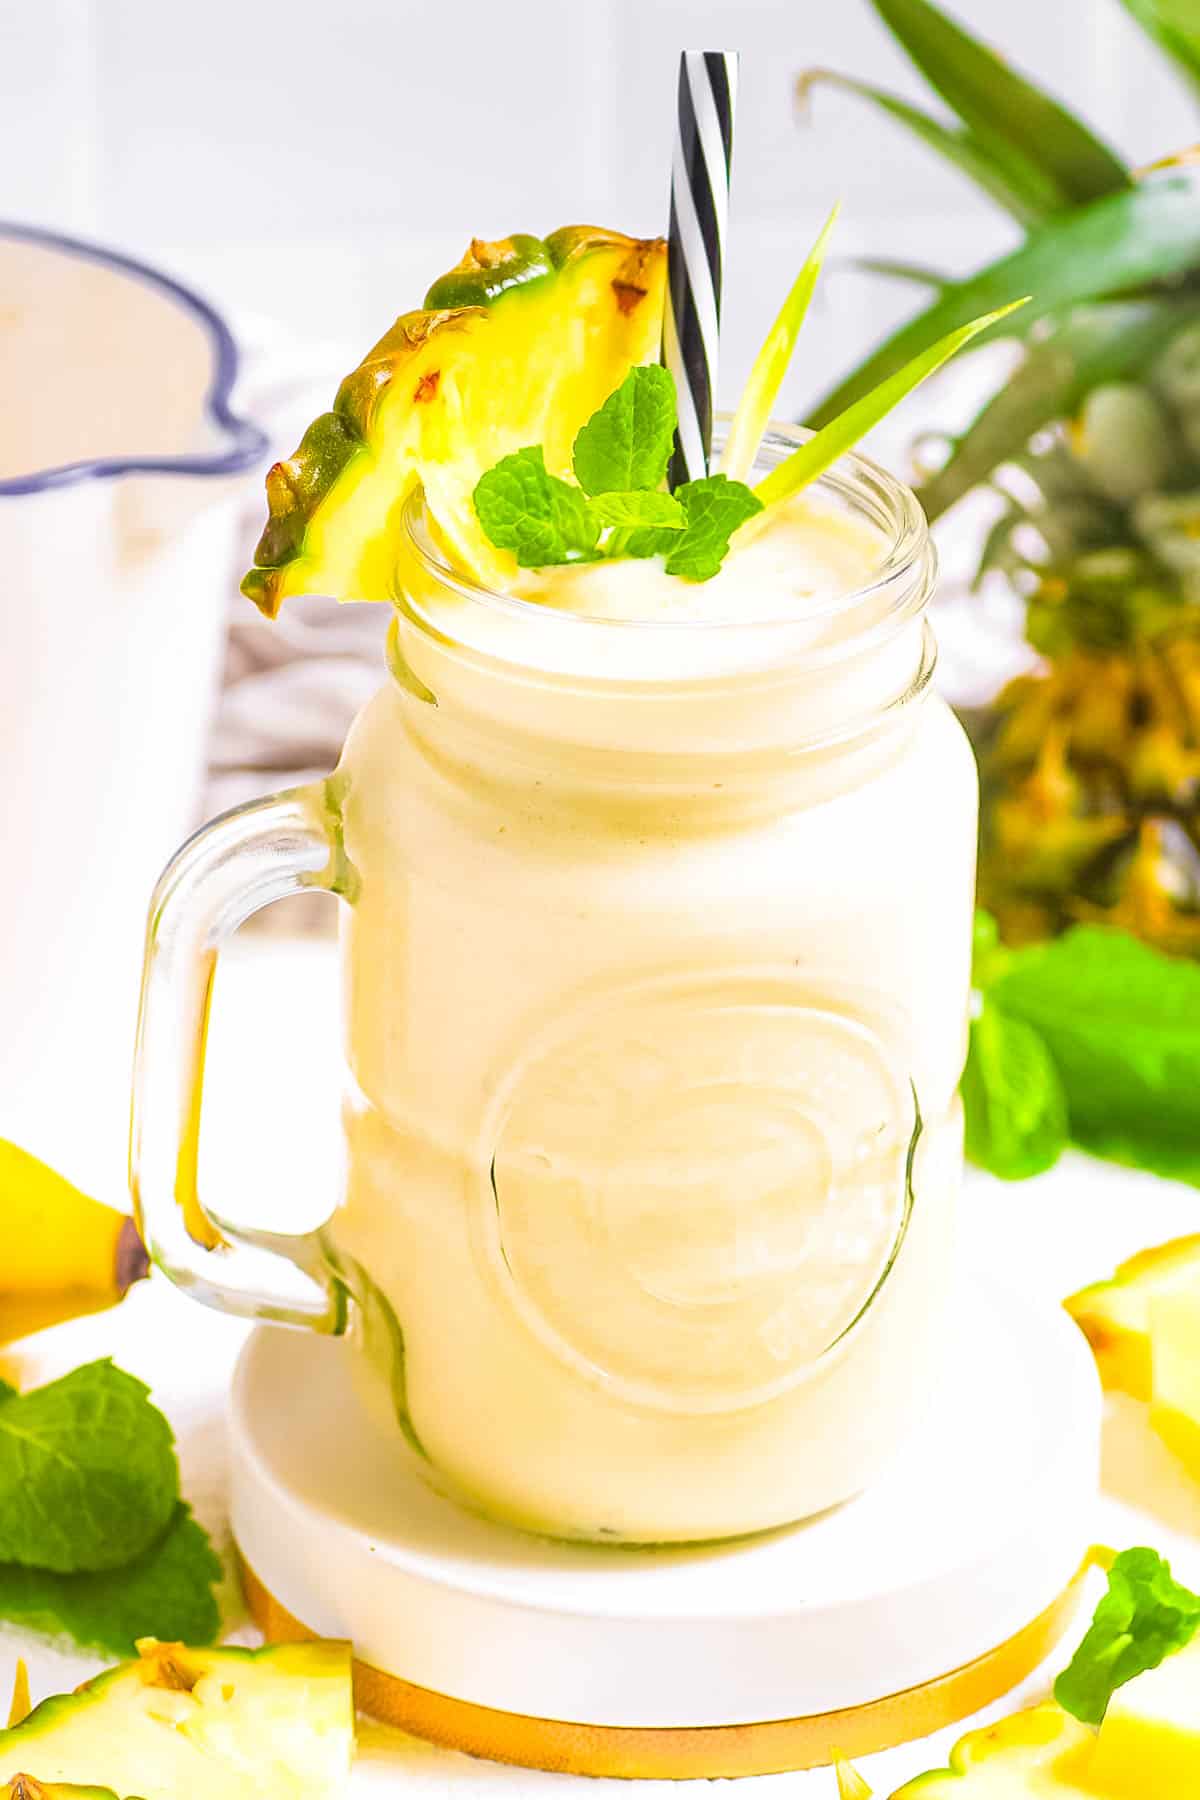 Pineapple and banana smoothie, served in a glass, garnished with a pineapple wedge and mint leaves.